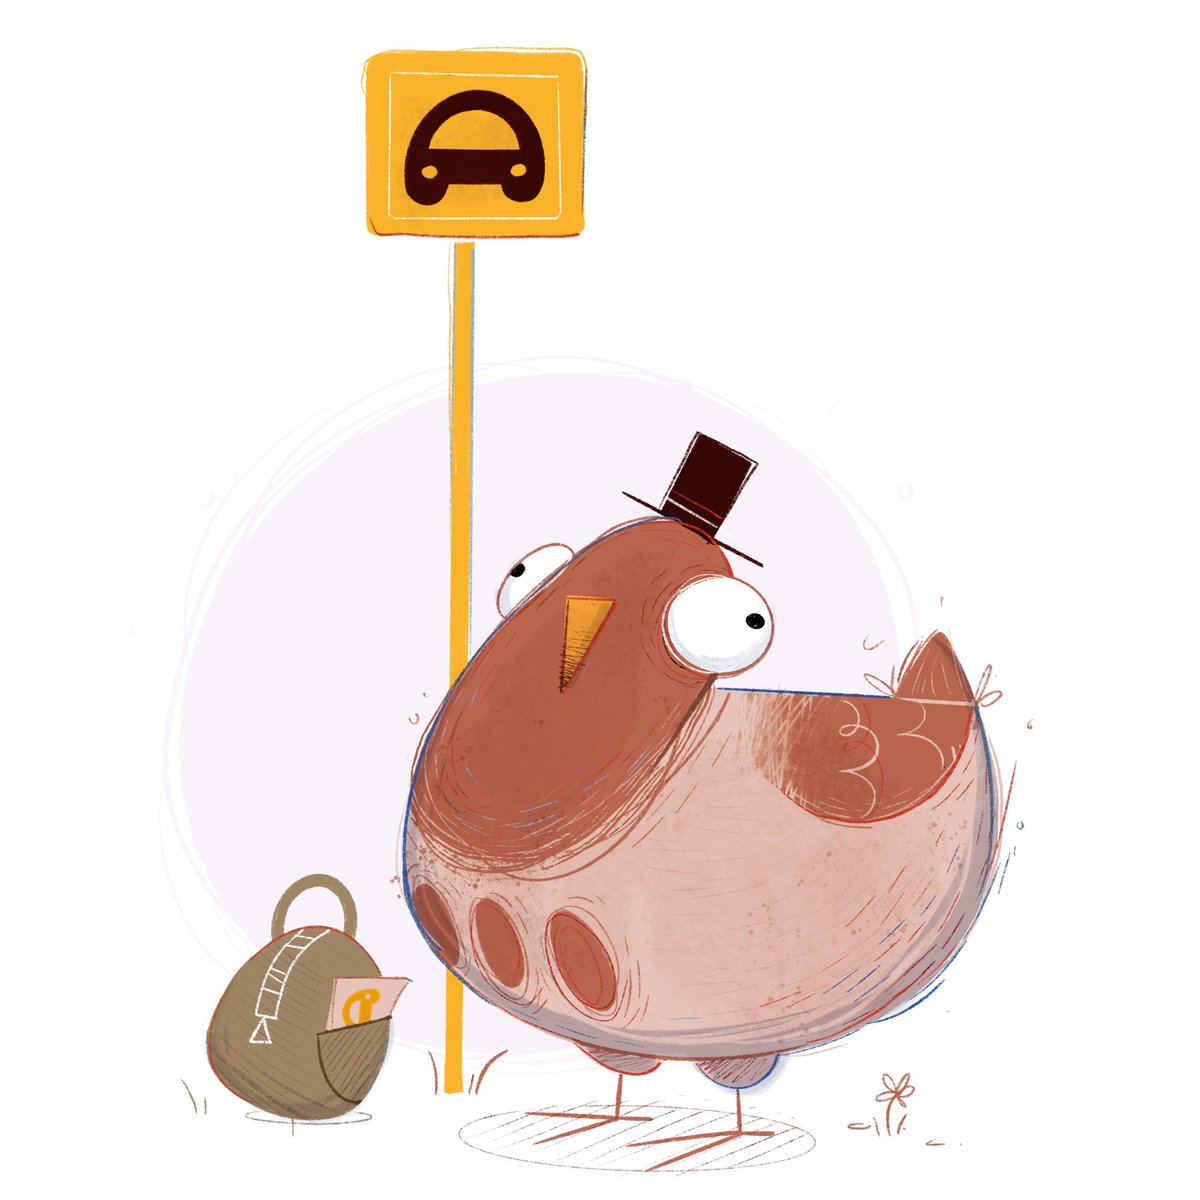 Here’s a chicken on her way to work (probably before her maternity leave kicks off!) #kidlitart #kidlitart #kidlitillustration #kidlitartist #kidlitillustrator #picturebookillustration #picturebookart #picturebookartist #illustrator #illustration #childrensbookillustration